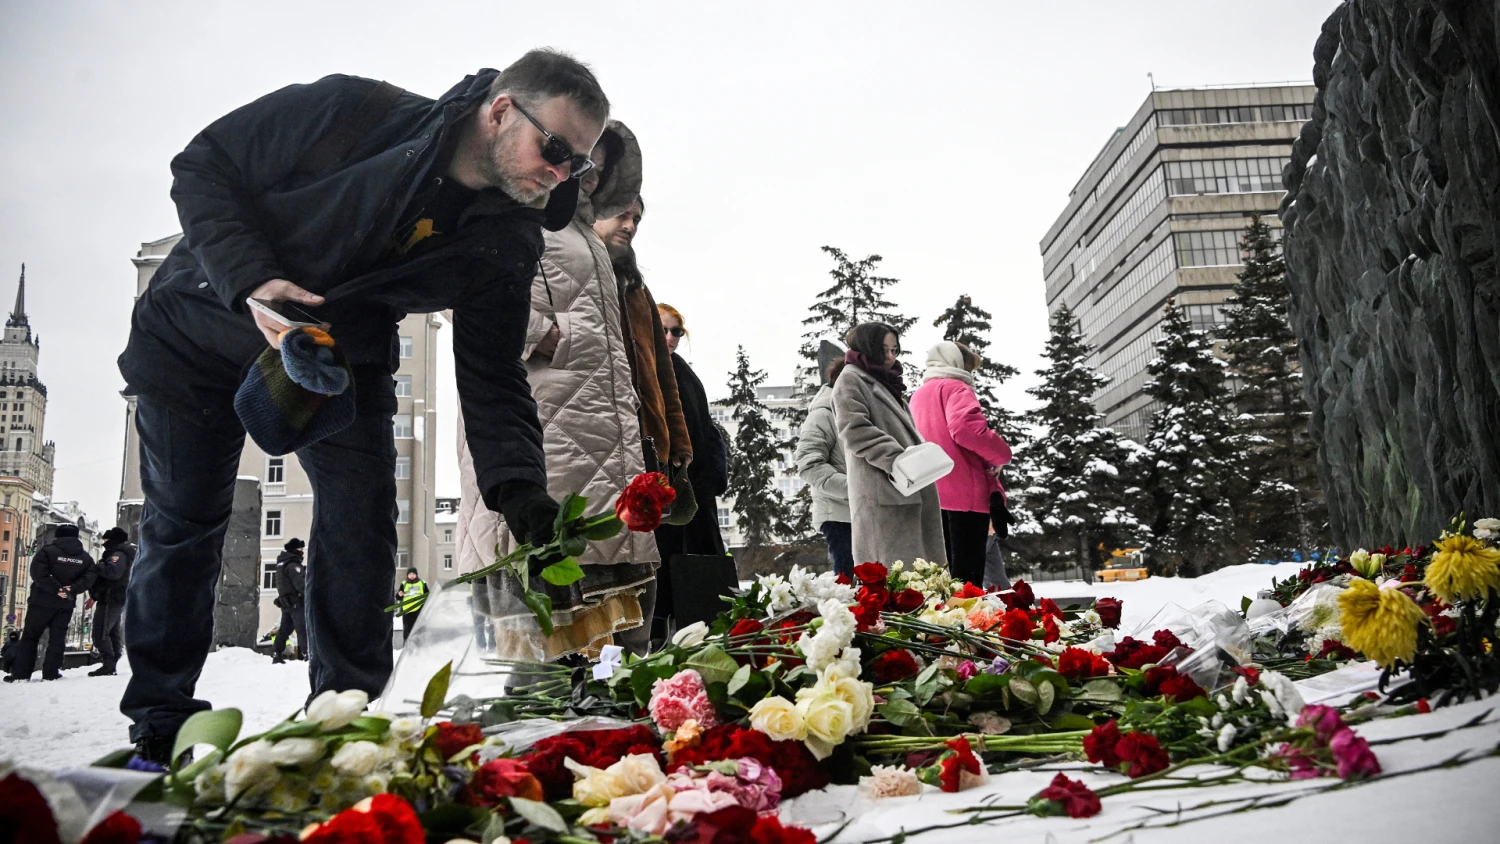 Floral Homage to Alexei Navalny Dismantled, Mourners Apprehended in Russian Urban Centers